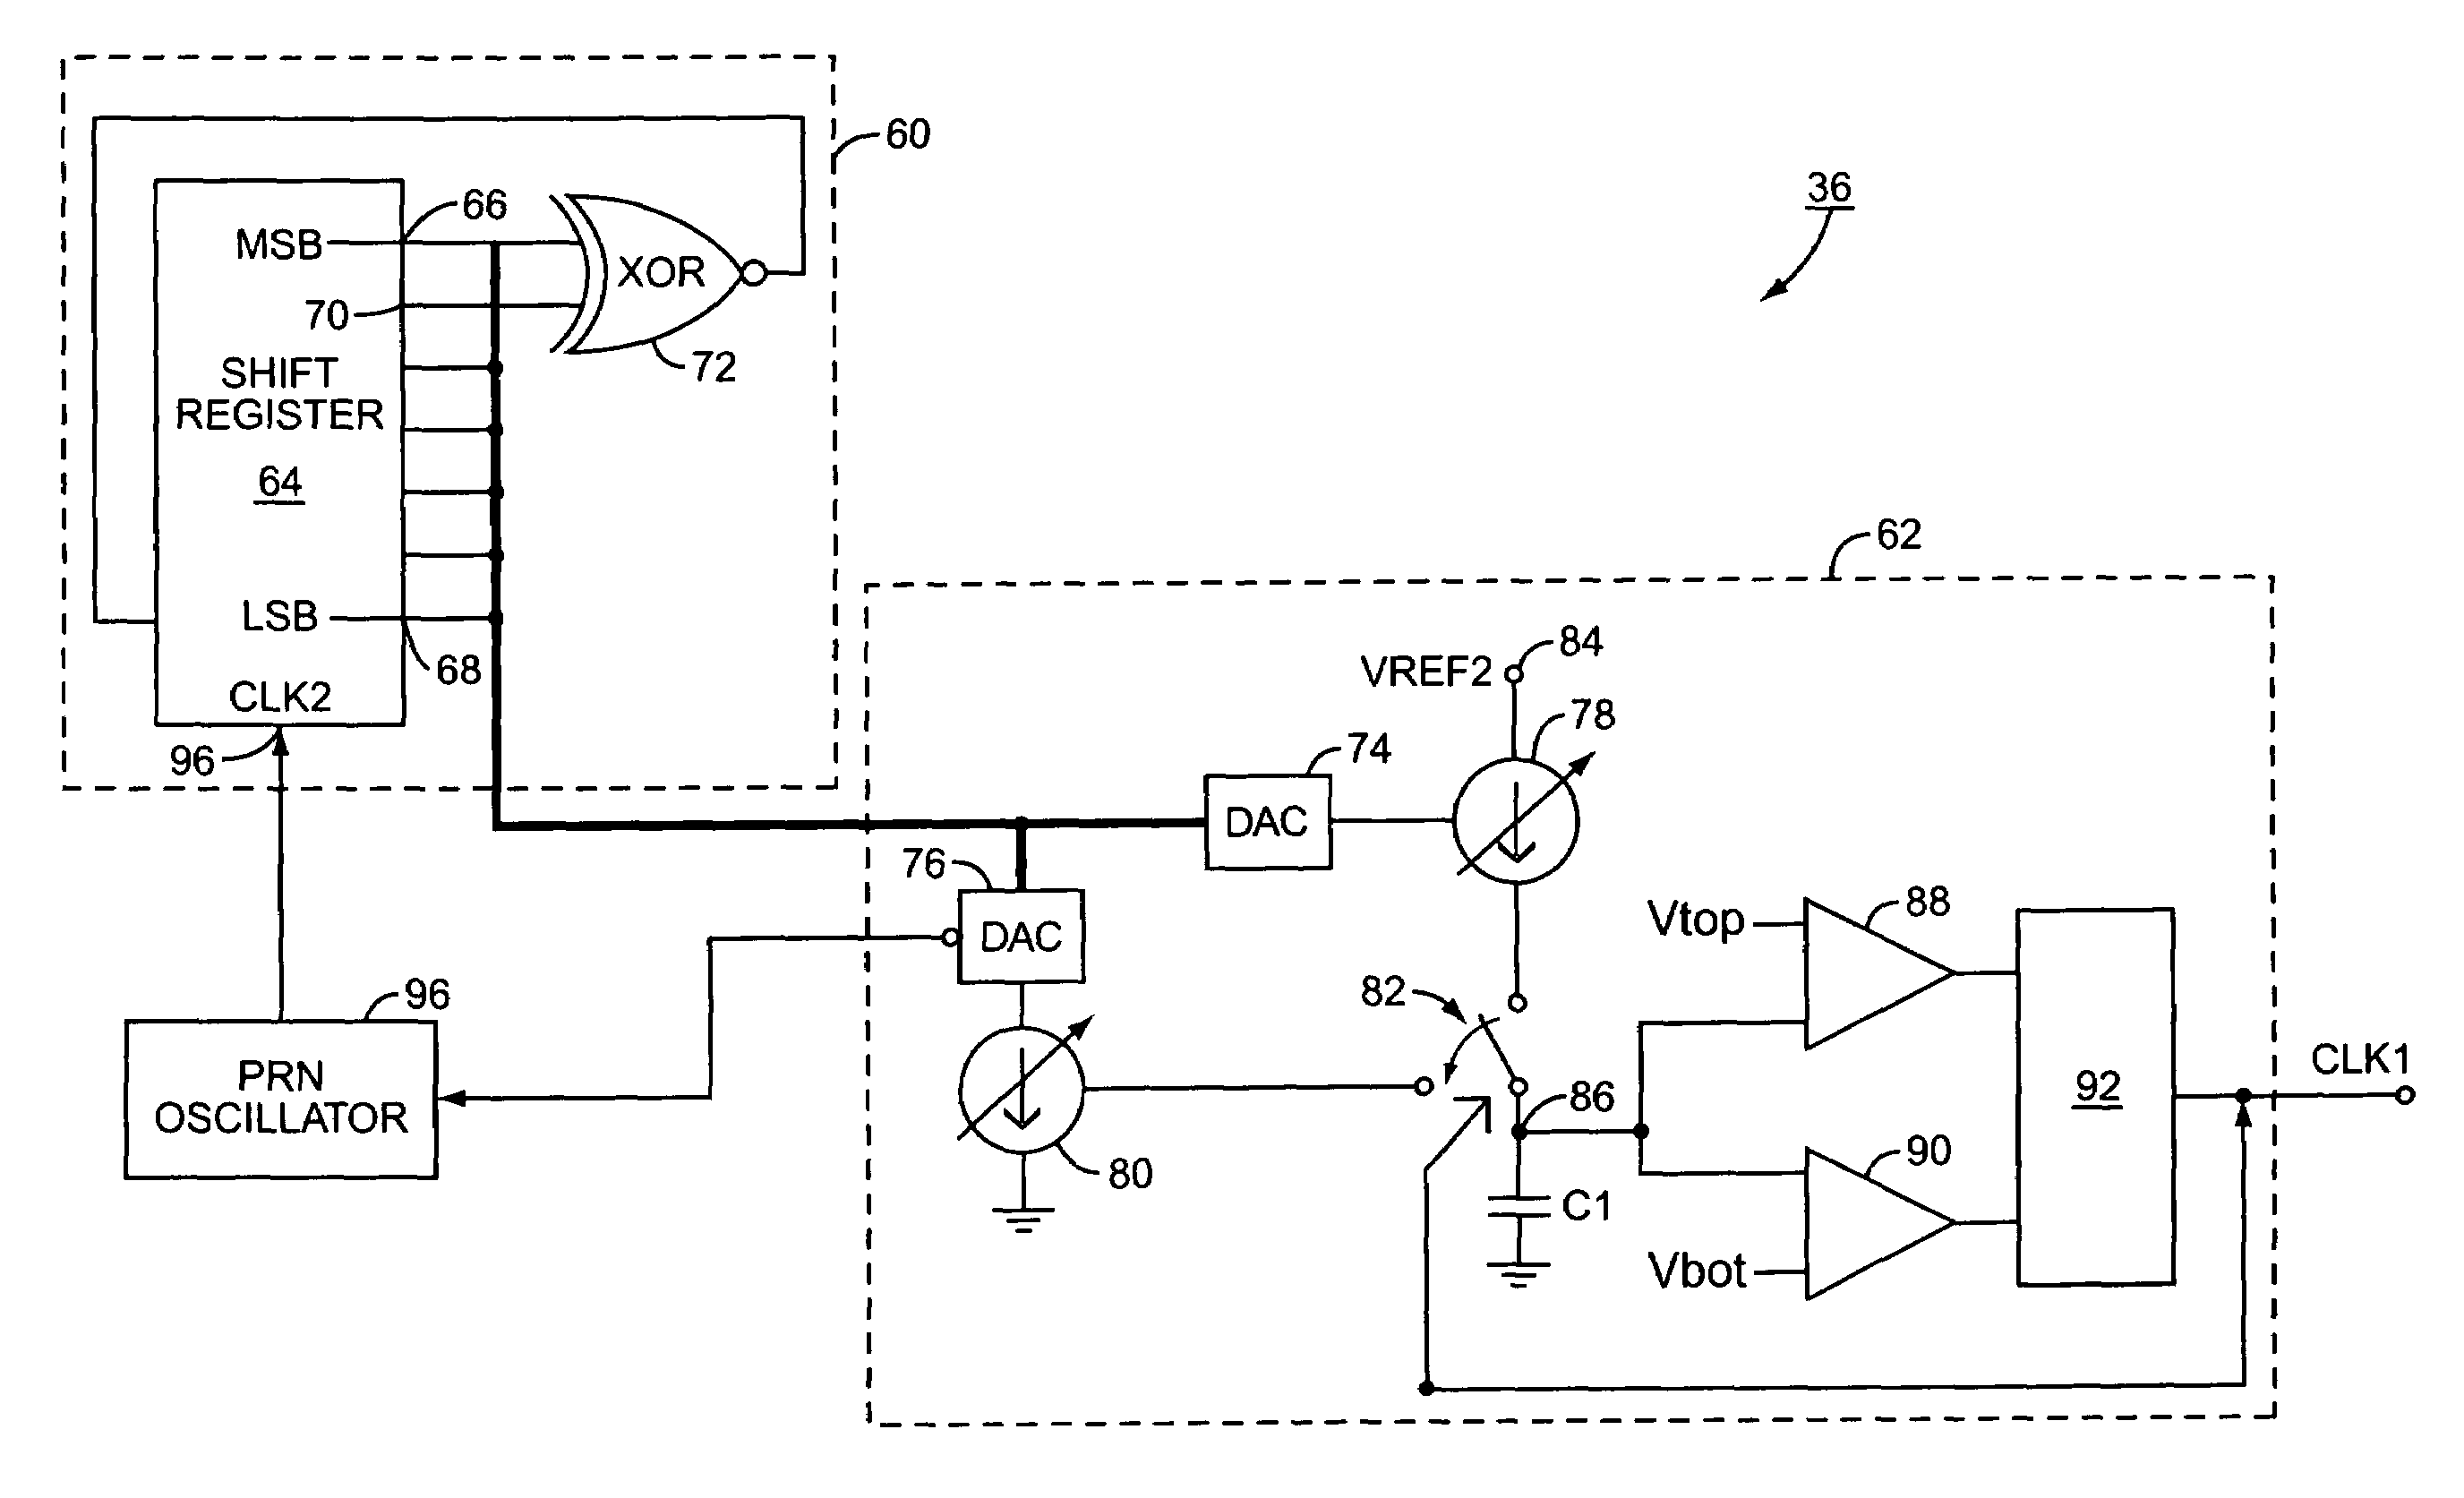 DC-DC converter with noise spreading to meet spectral mask requirements